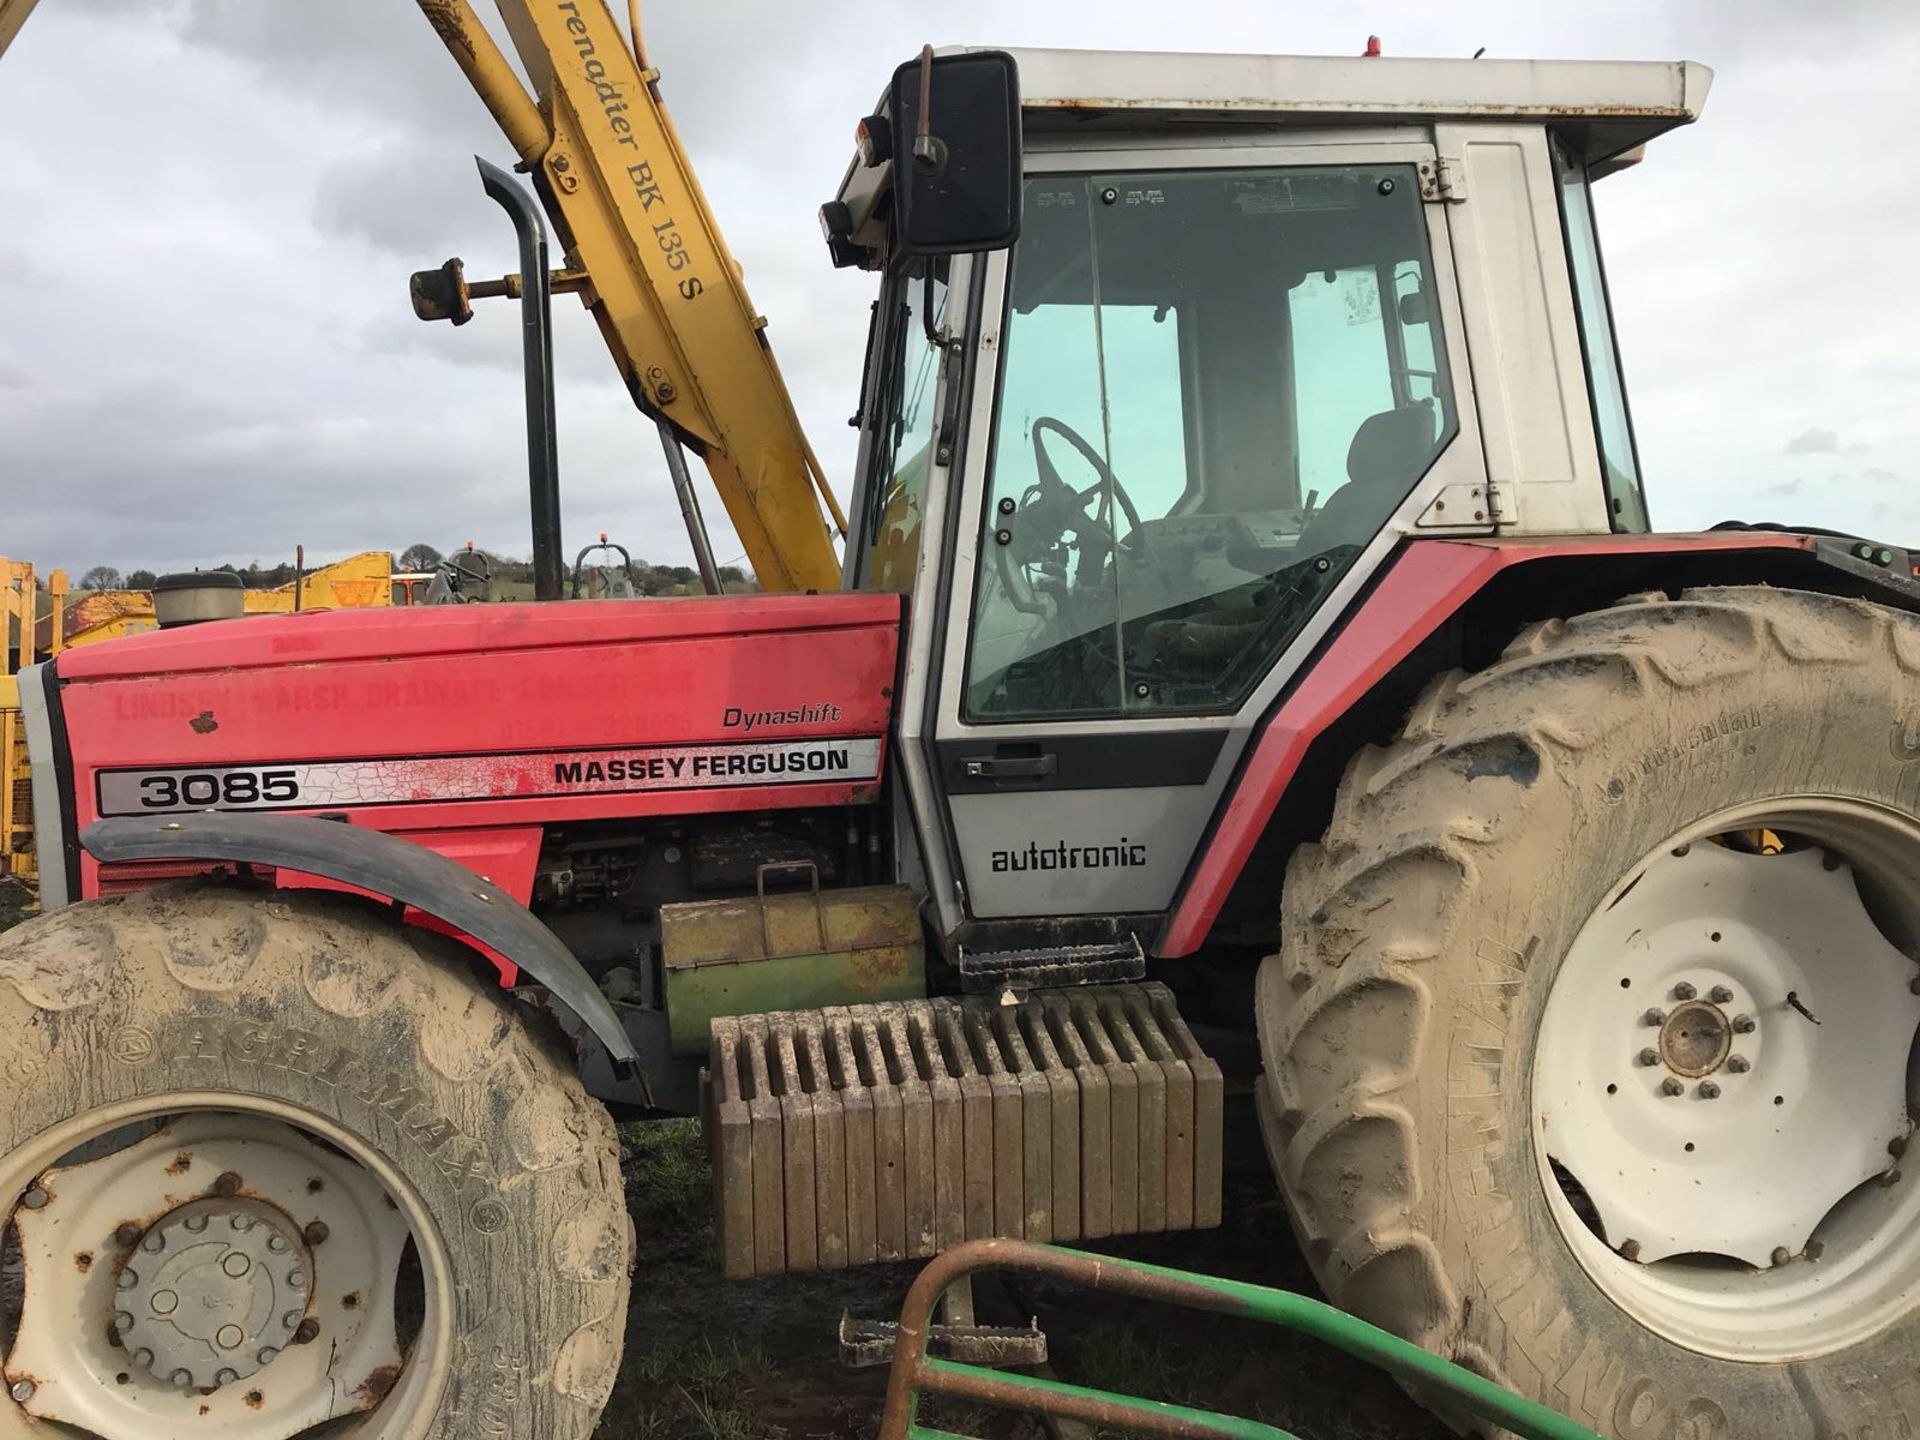 MASSEY FERGUSON 3085 DYNASHIFT AUTOTRONIC TRACTOR WITH DITCHER AND HEDGE CUTTER ATTACHMENT - Image 9 of 11